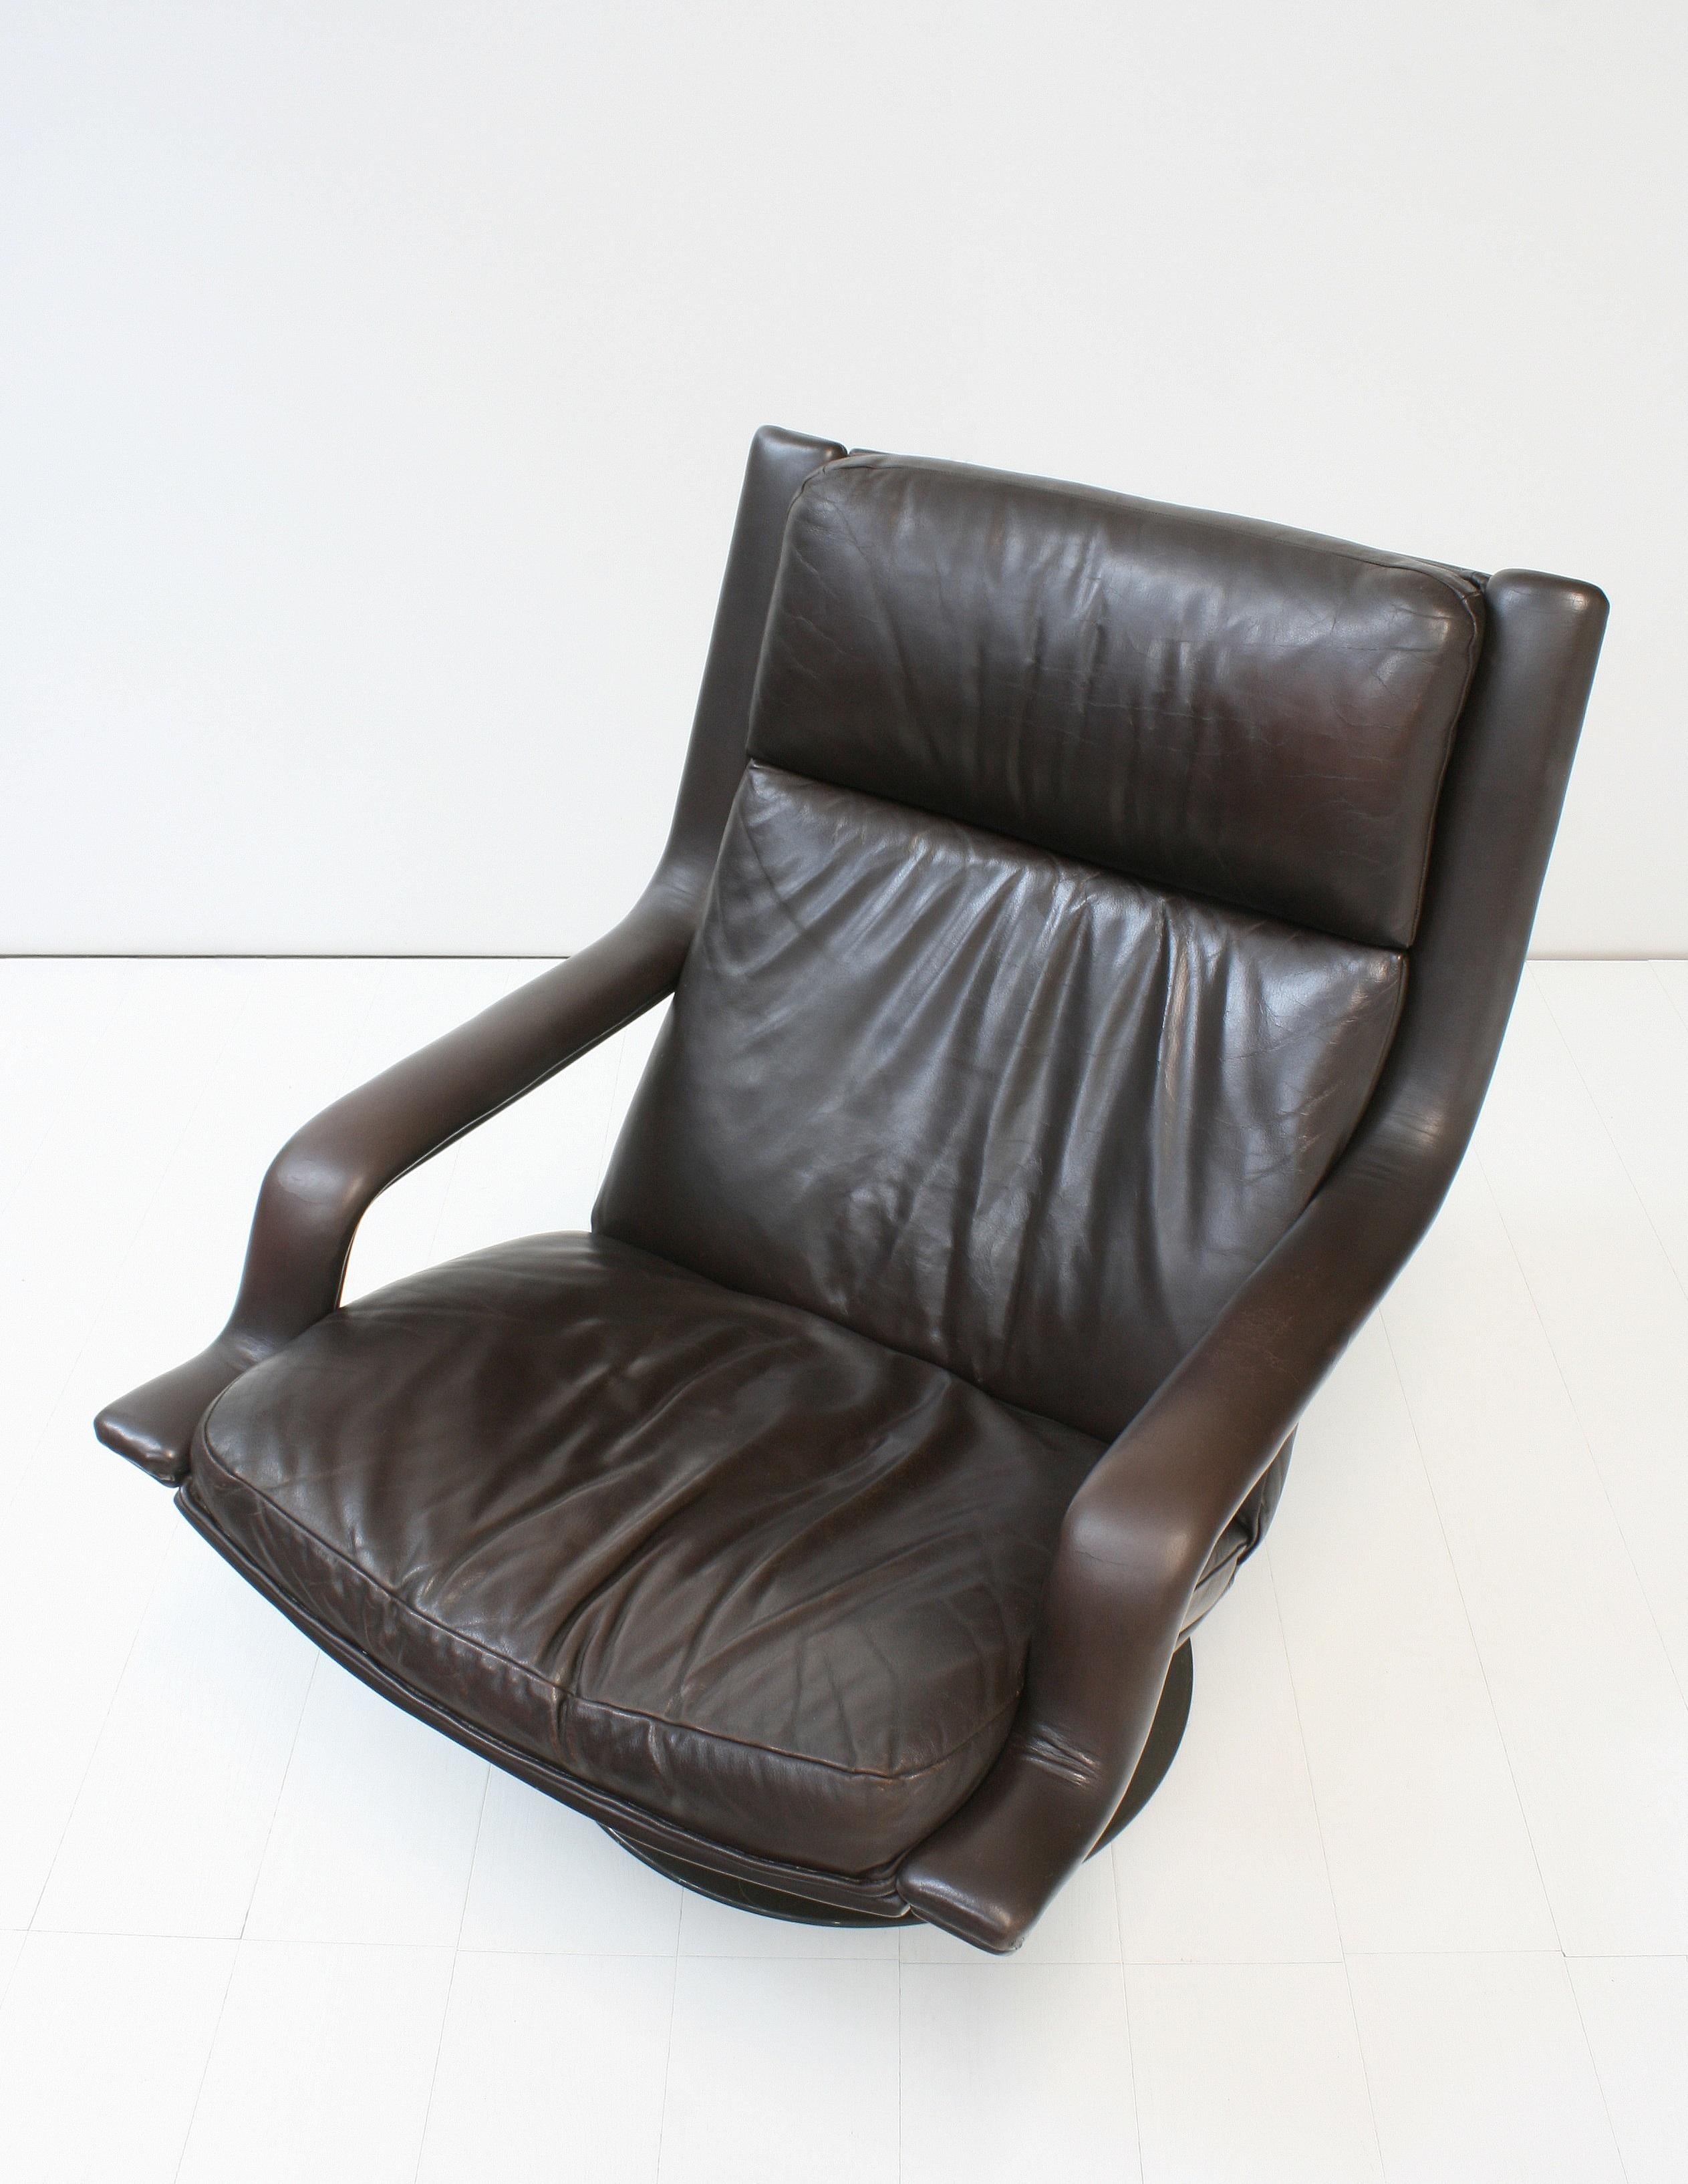 2 F152 Leather Swivel Lounge Chairs by Geoffrey D Harcourt for Artifort, 1970s For Sale 2